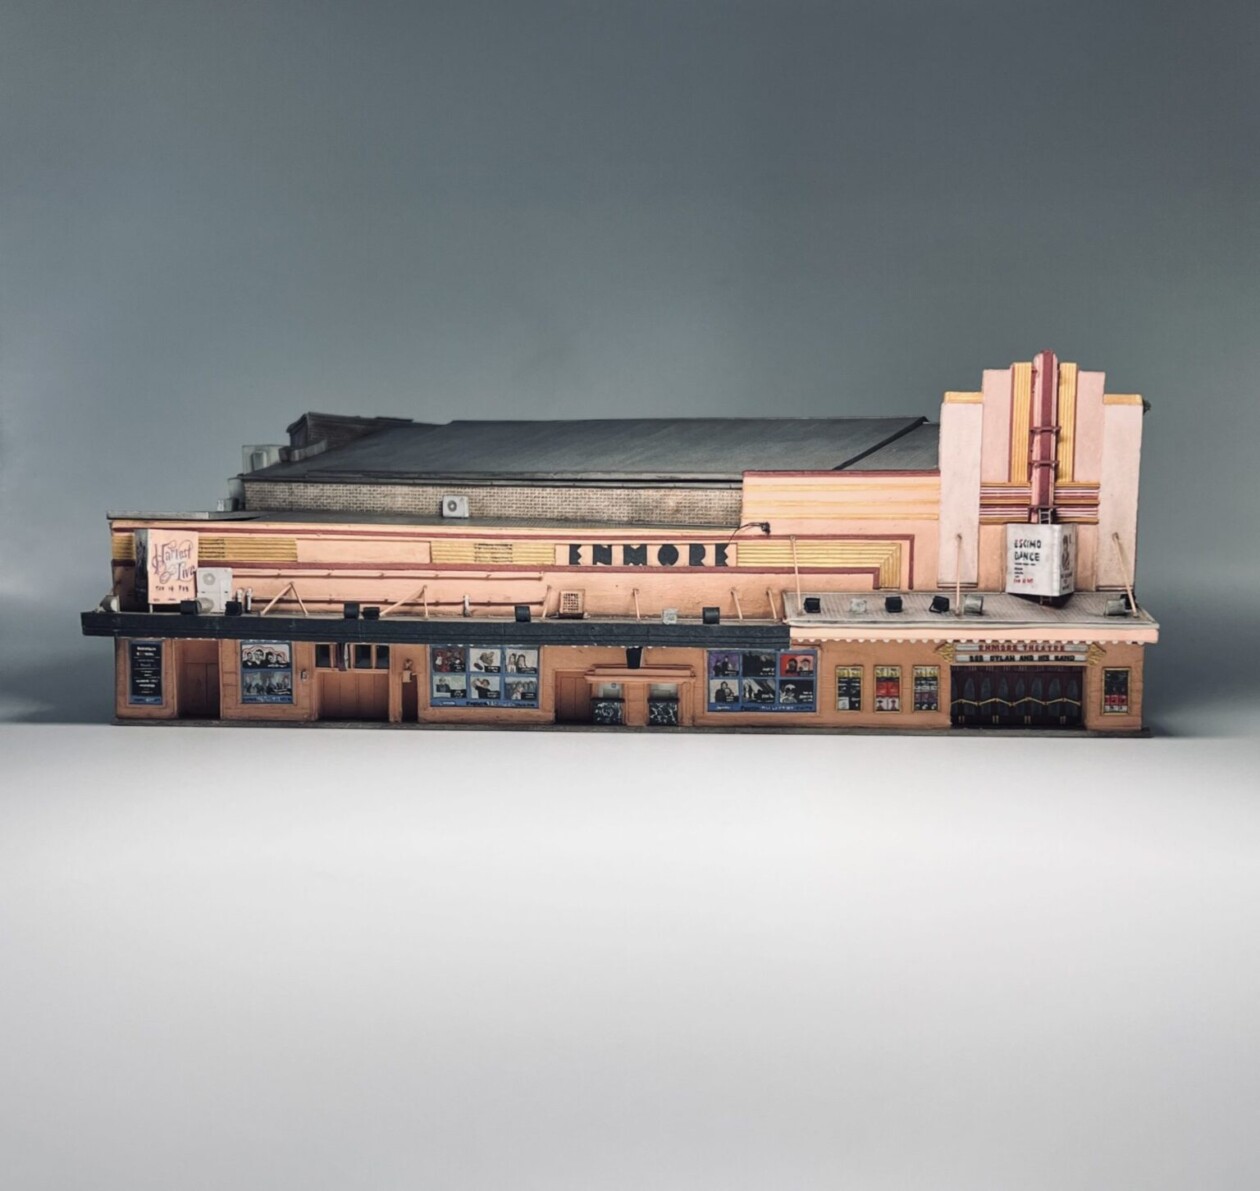 Whimsical Everyday Life And Historical Buildings In Miniature By Mylyn Nguyen (3)